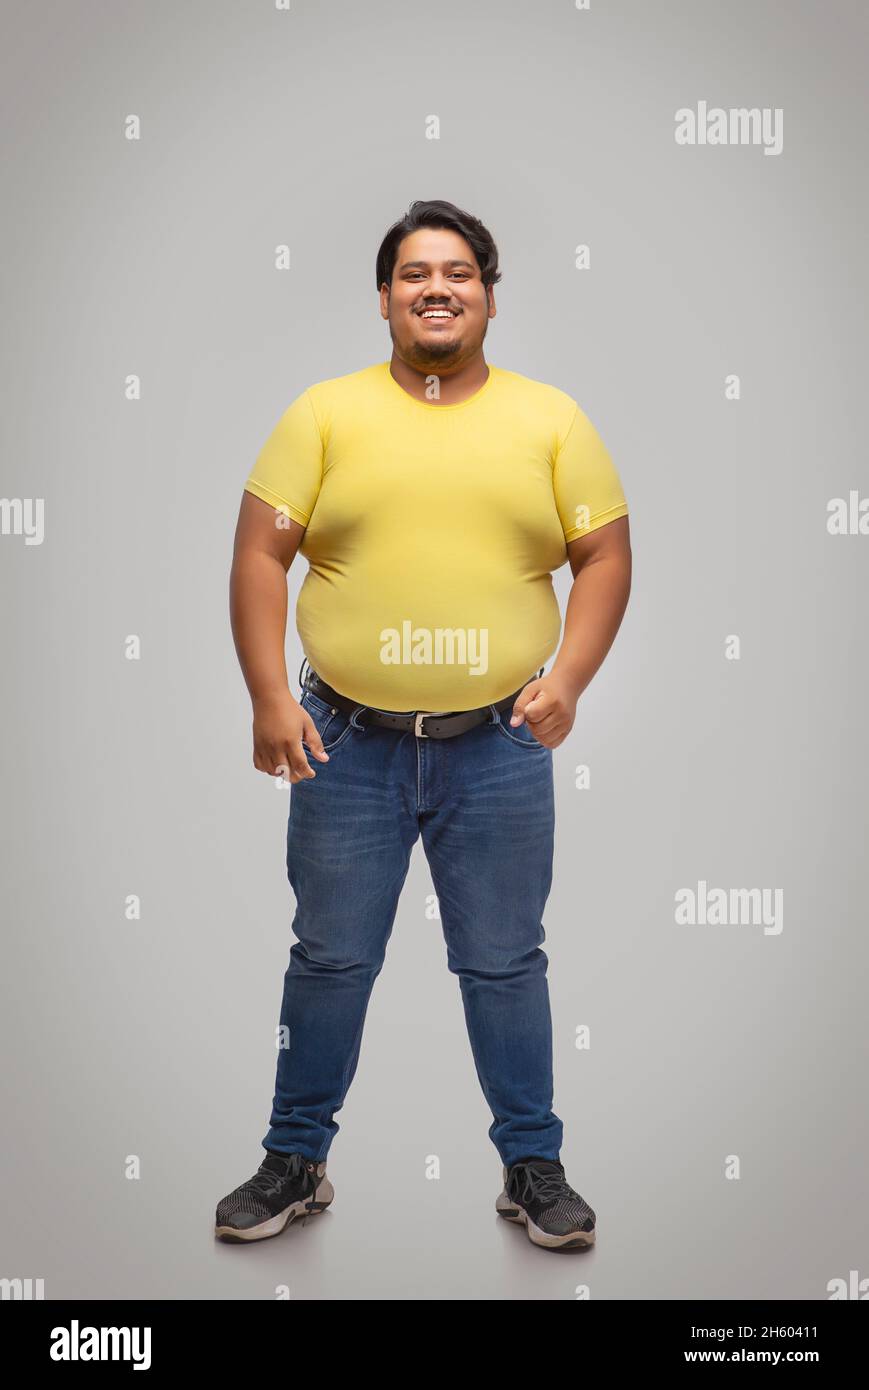 Portrait of a fat man standing and smiling against plain background. Stock Photo